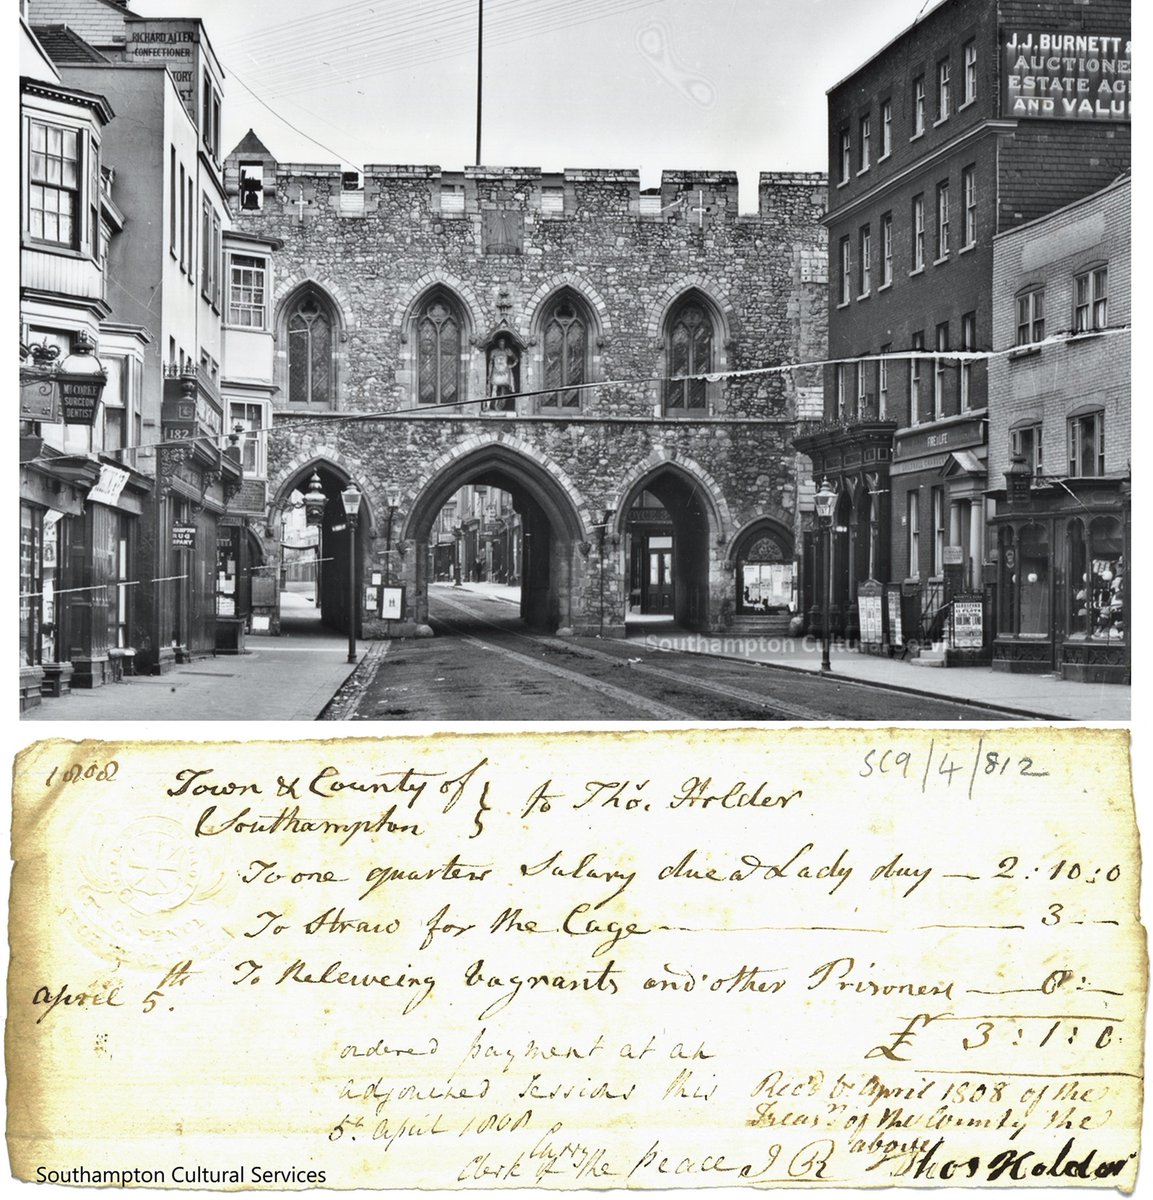 Did you know there used to be a #prison at the #Bargate called the Cage? This receipt from 1808 includes payment for “straw for the Cage” to provide some comfort to “vagrants and other prisoners” held there. 📷shows Bargate later in the #1800s #SotonAfterDark #Southampton